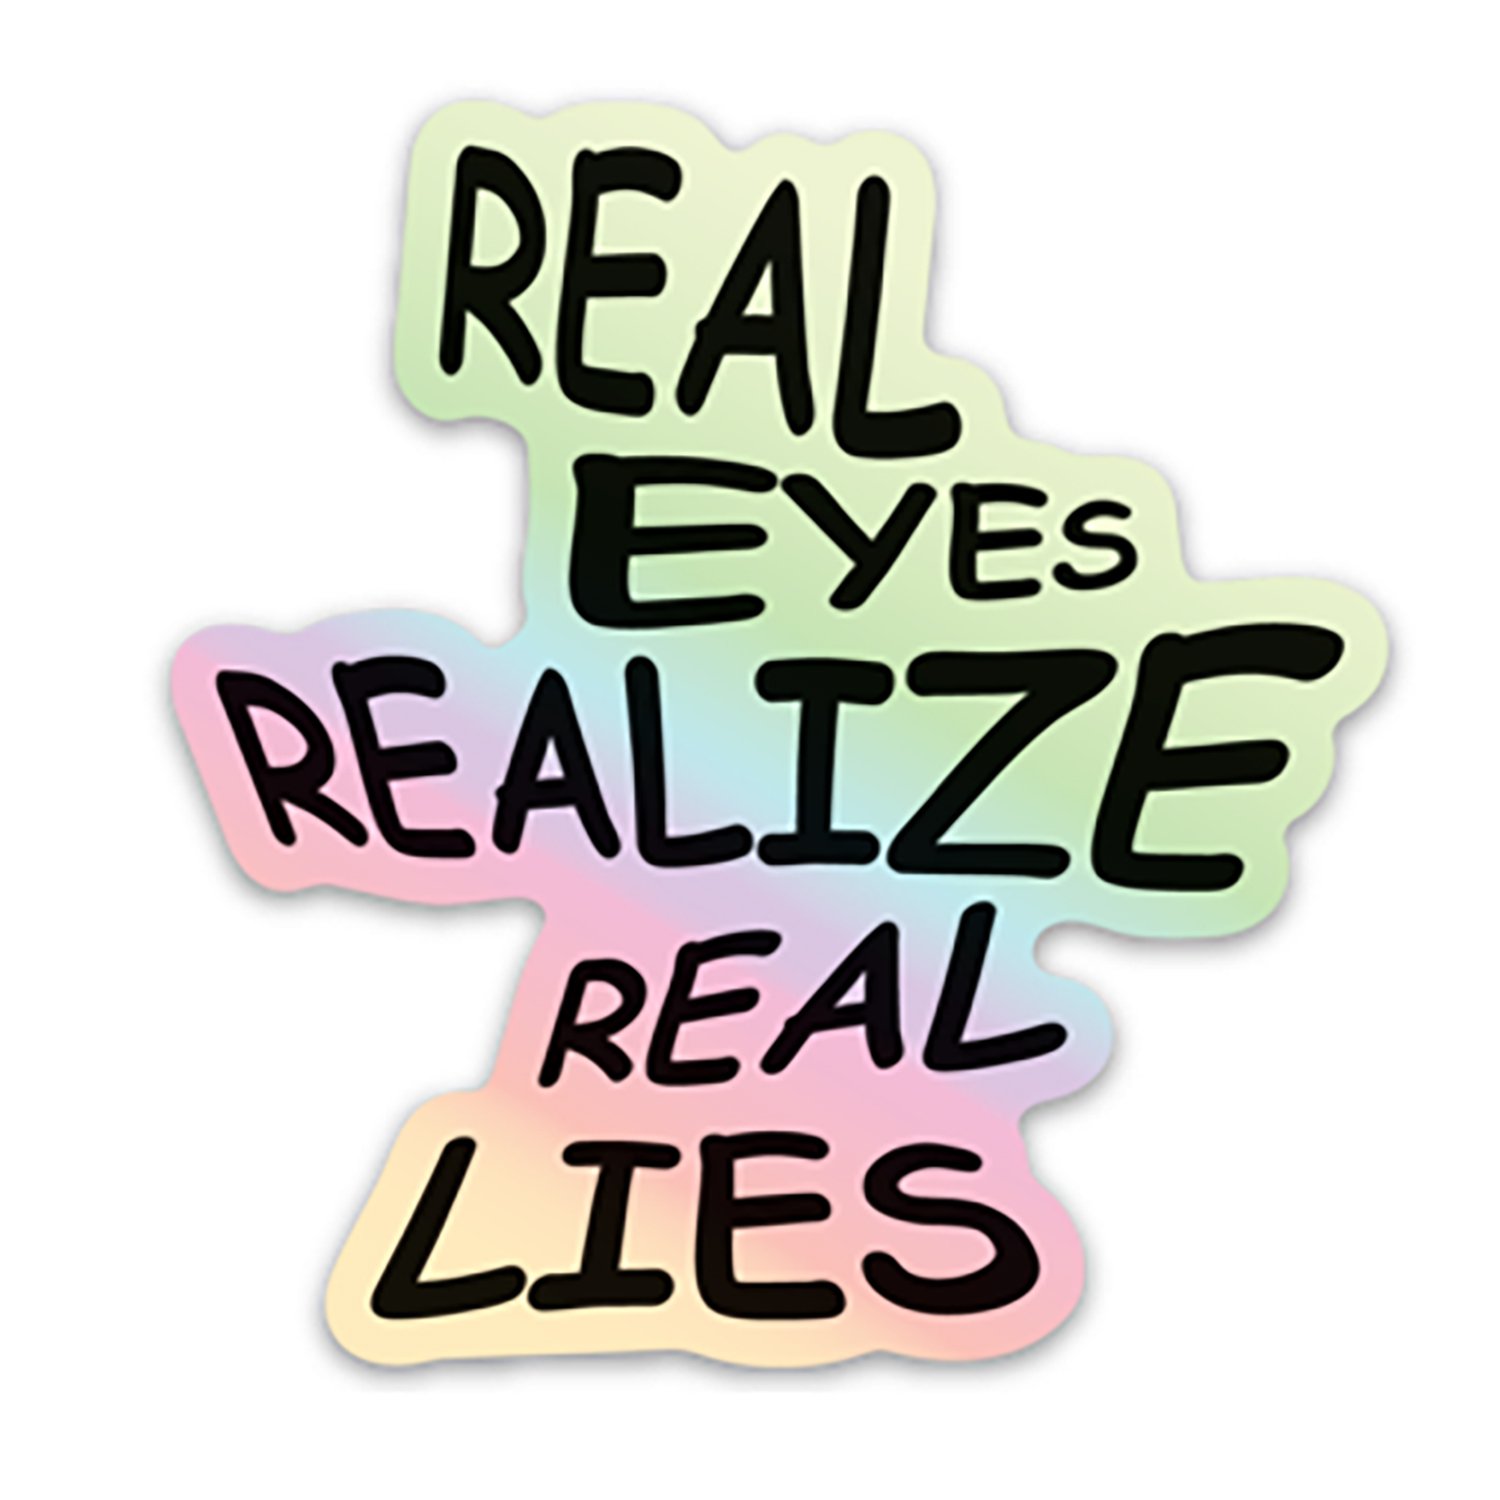 Image of REAL EYES REALIZE REAL LIES